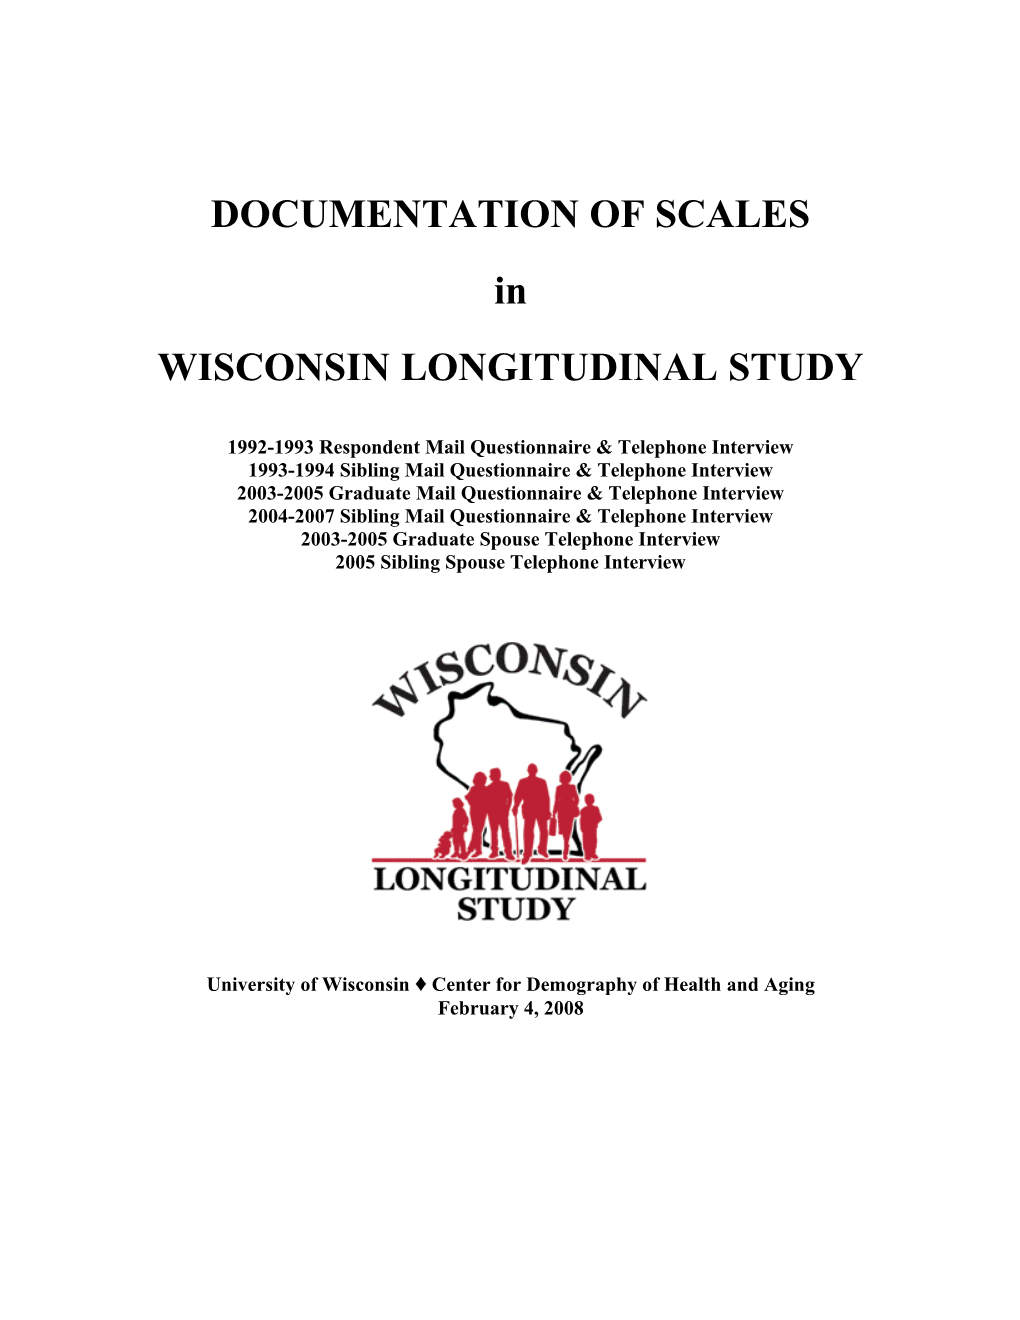 Documentation of Scales